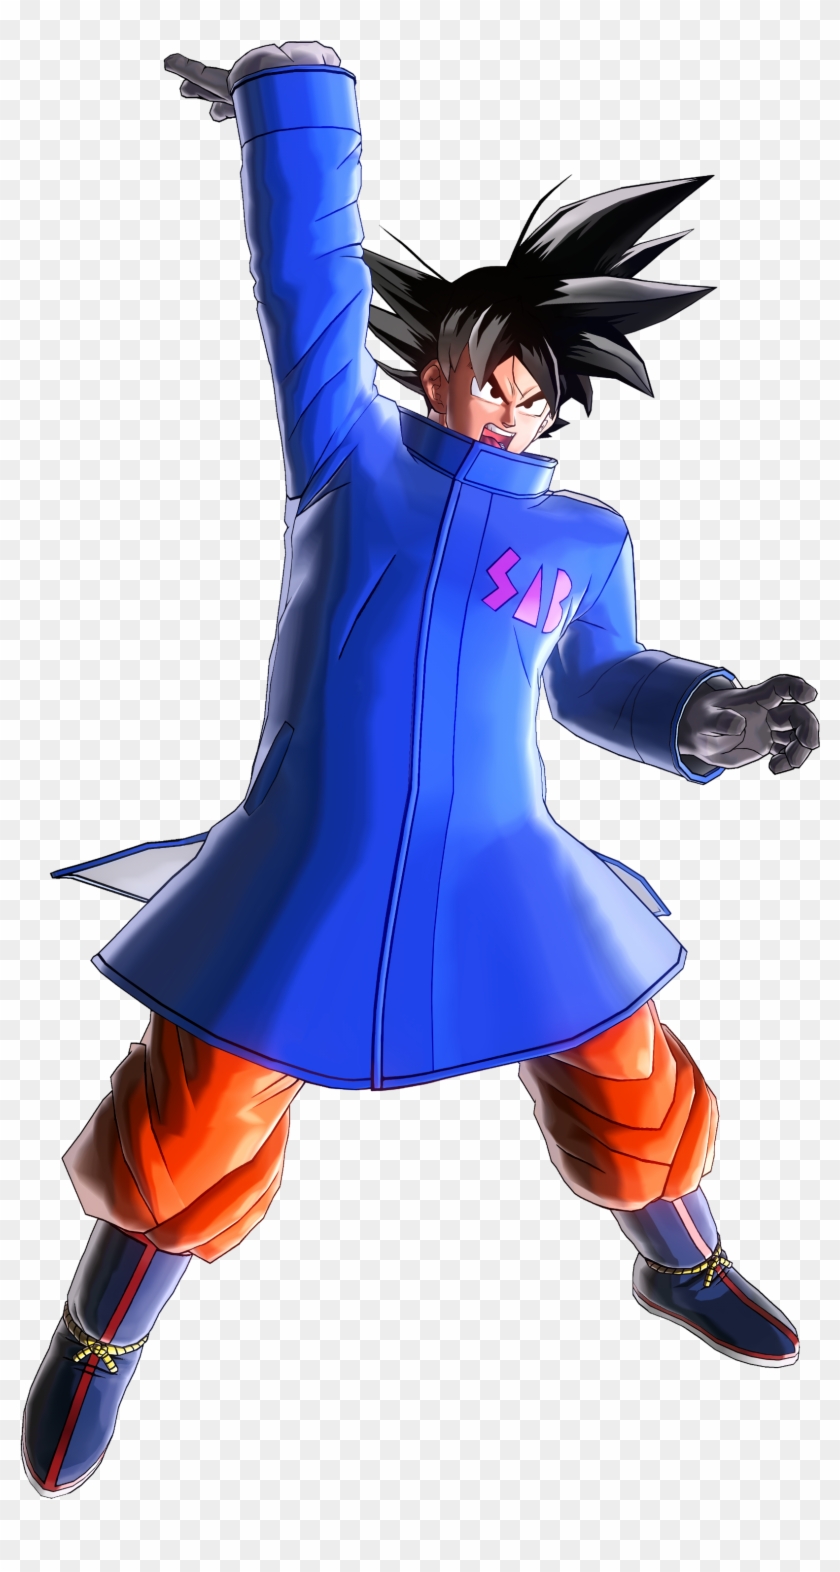 Goku Snow Suit Gogeta Blue Dragon Ball Xenoverse 2 Hd Png Download 2400x3000 2079982 Pngfind